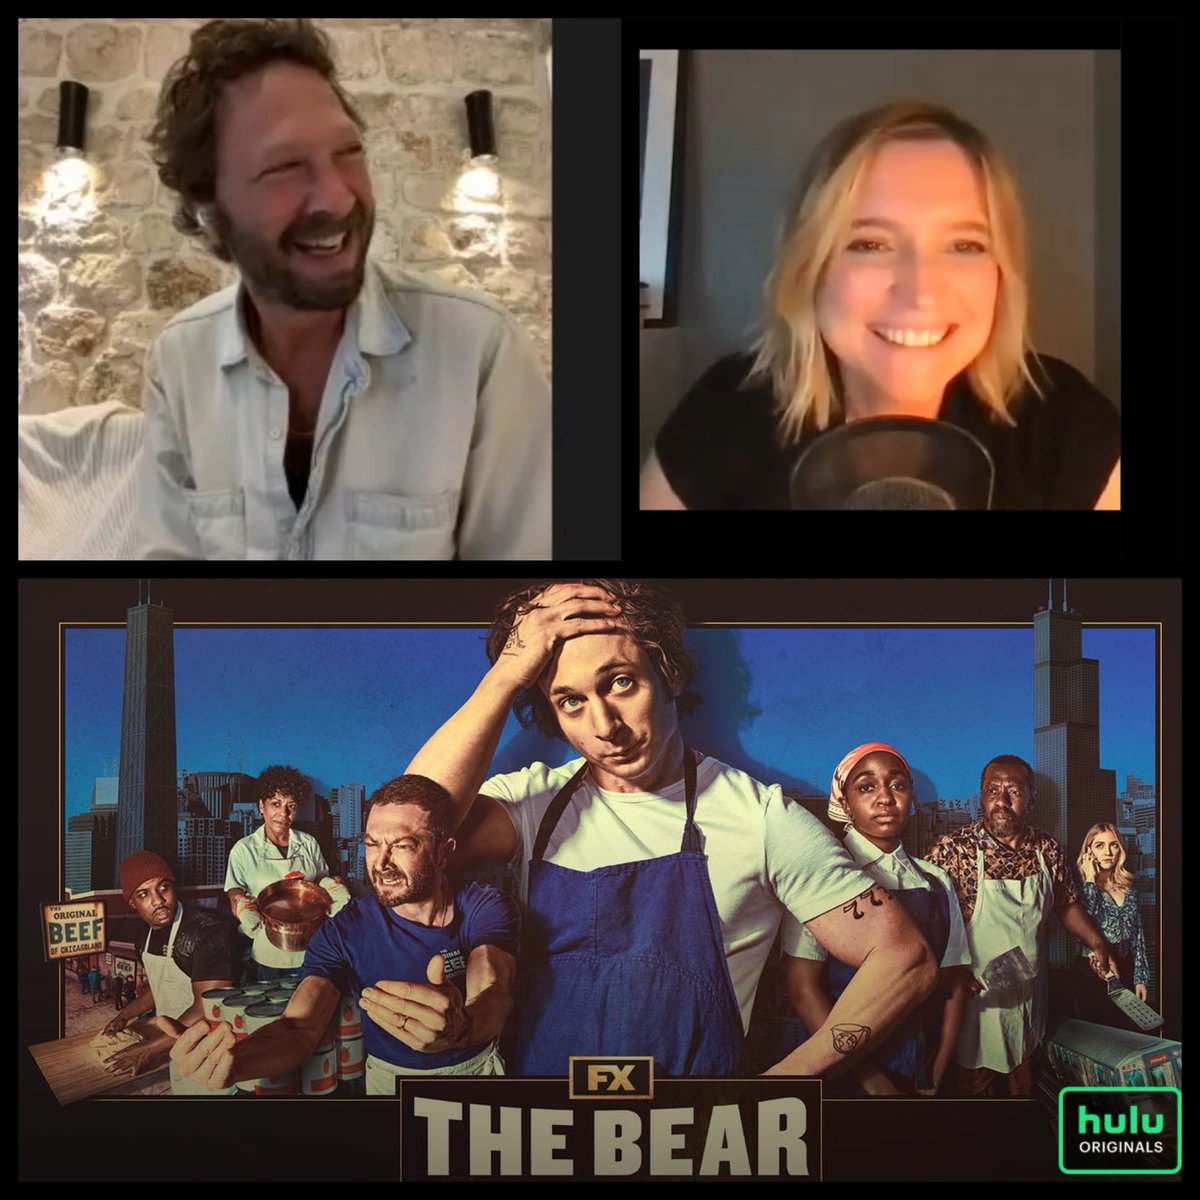 Thank you @EbonMossB for joining me (on your vacation, no less!) to talk abt your incredible performance as Richie, #TheBear, creating backstory, compassion for the character & much more. Such a great talk! Listen NOW on Pop Culture Confidential @spotify popcultureconfidential.com